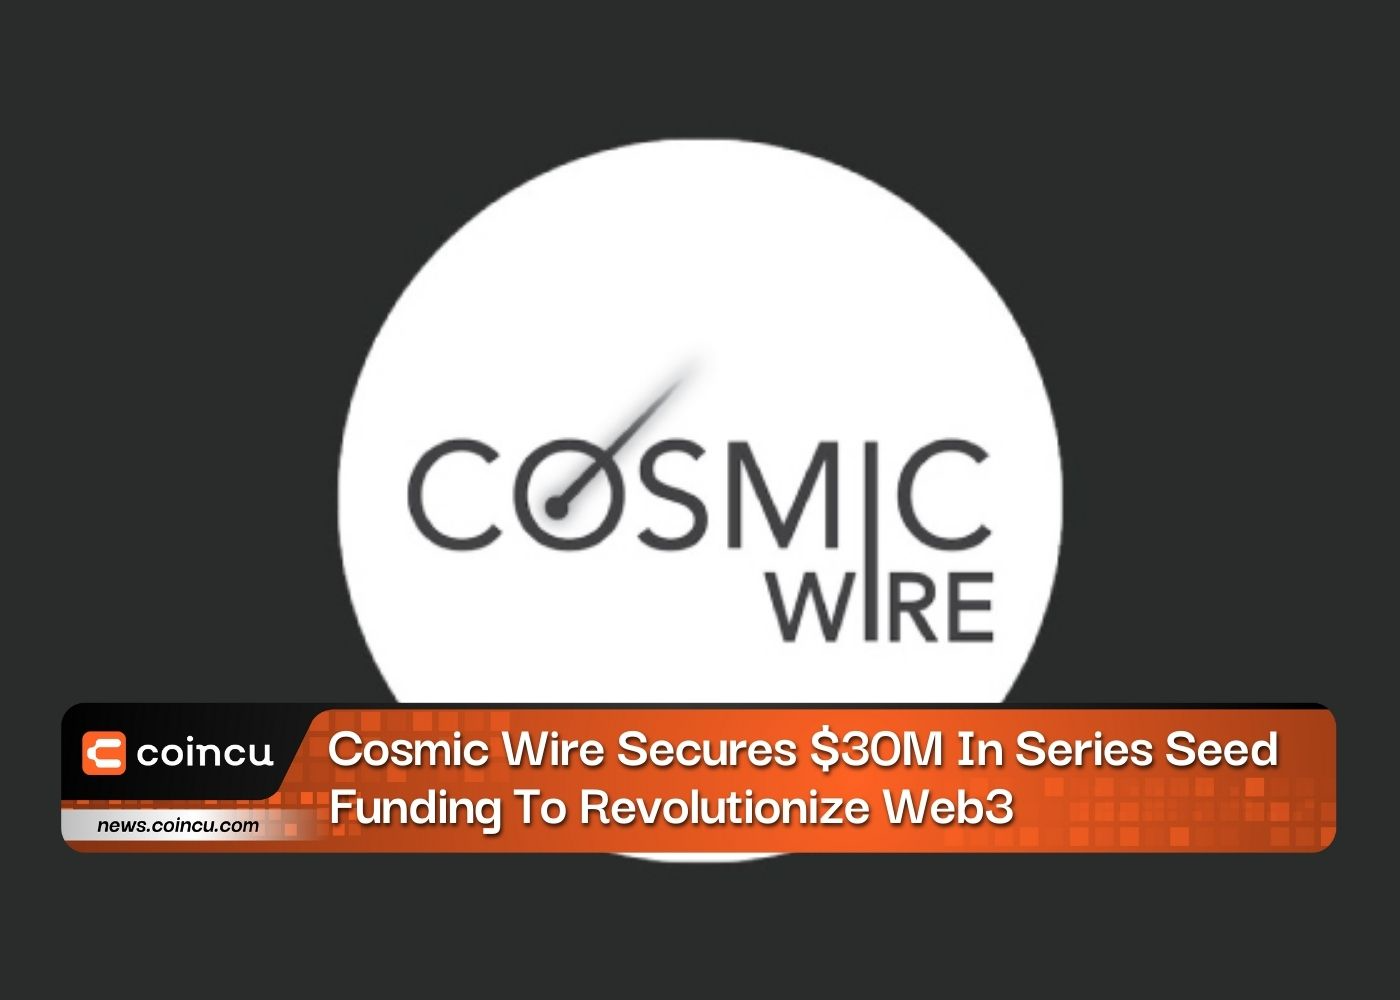 Cosmic Wire Secures $30M In Series Seed Funding To Revolutionize Web3